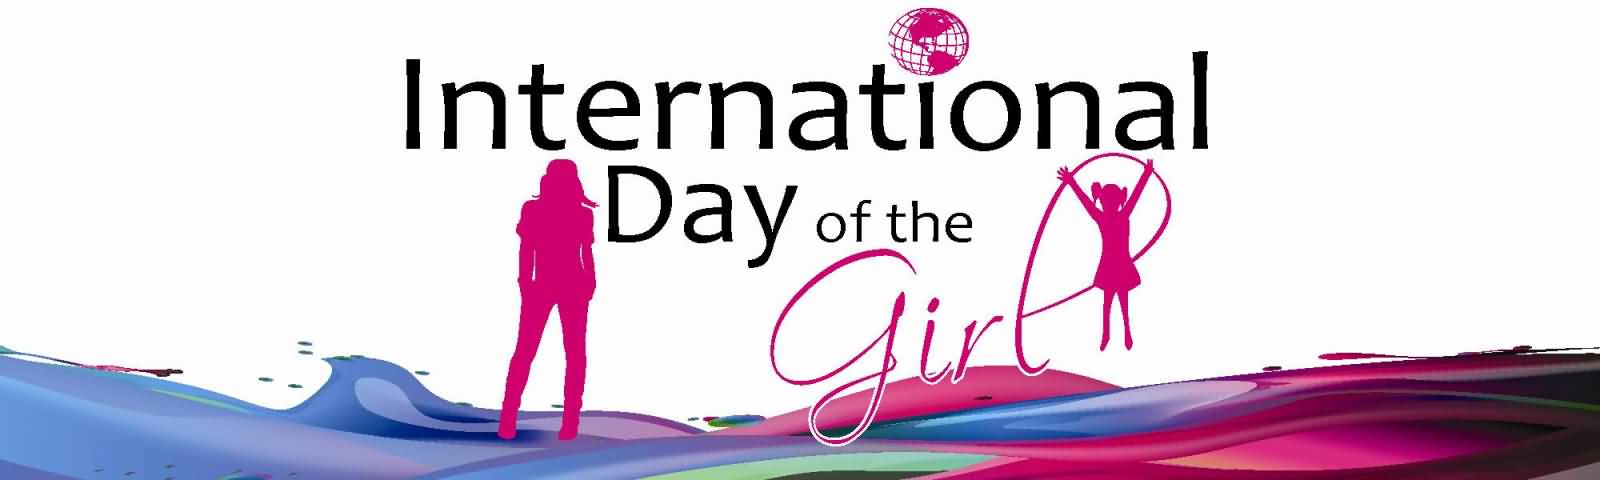 International Day Of The Girl Facebook Cover Picture